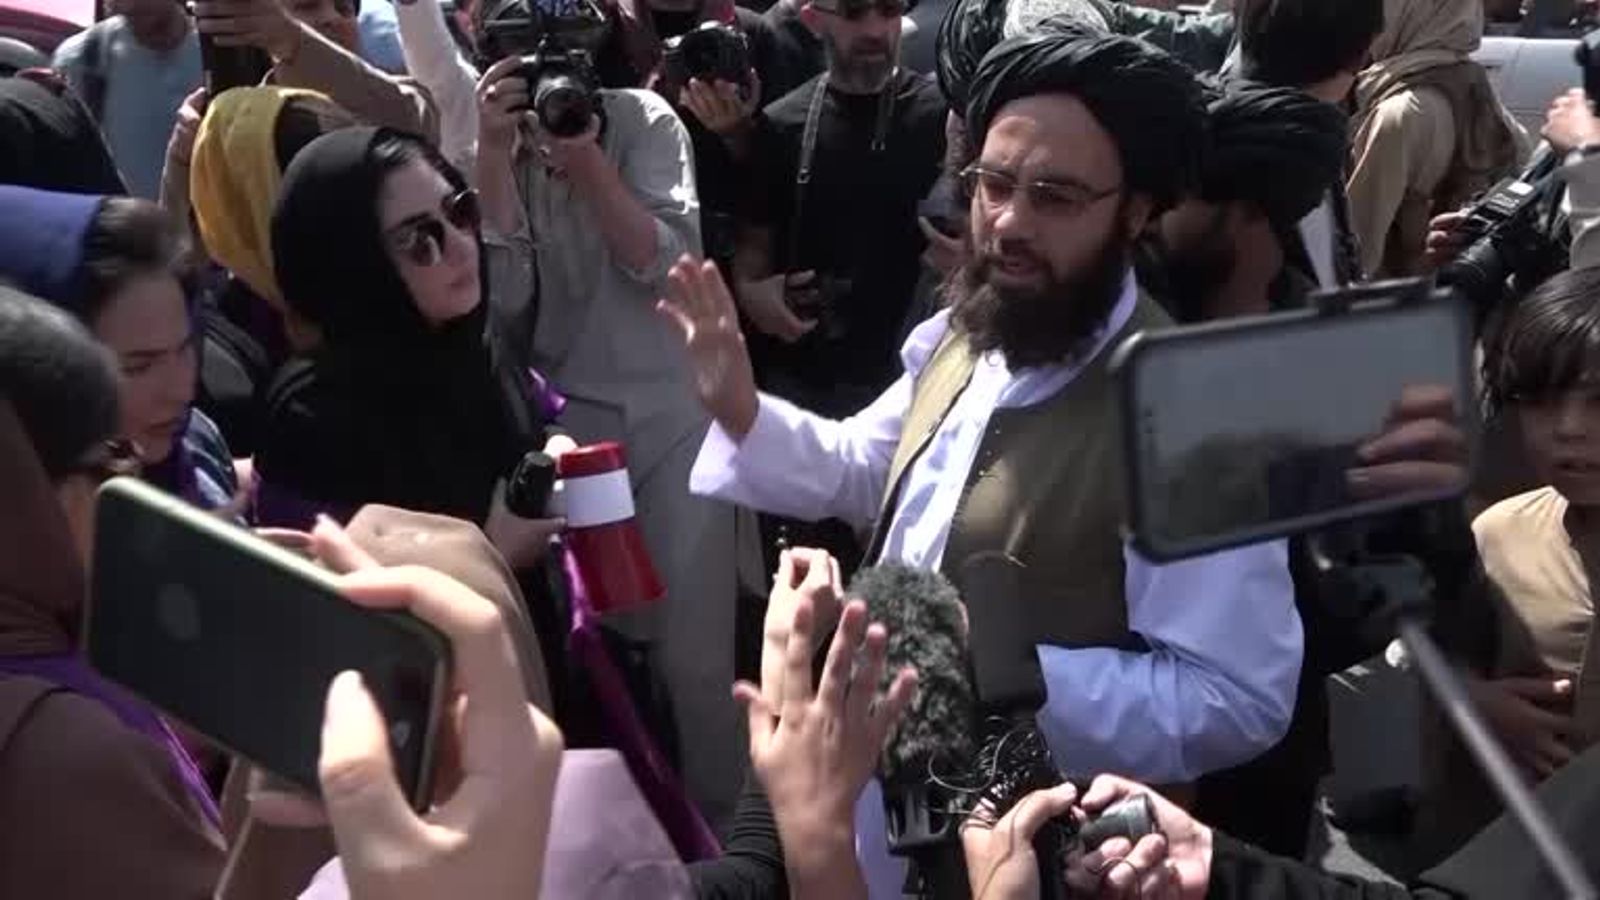 Afghanistan: Taliban breaks up women’s rights protests in Kabul by ‘firing shots and using teargas’